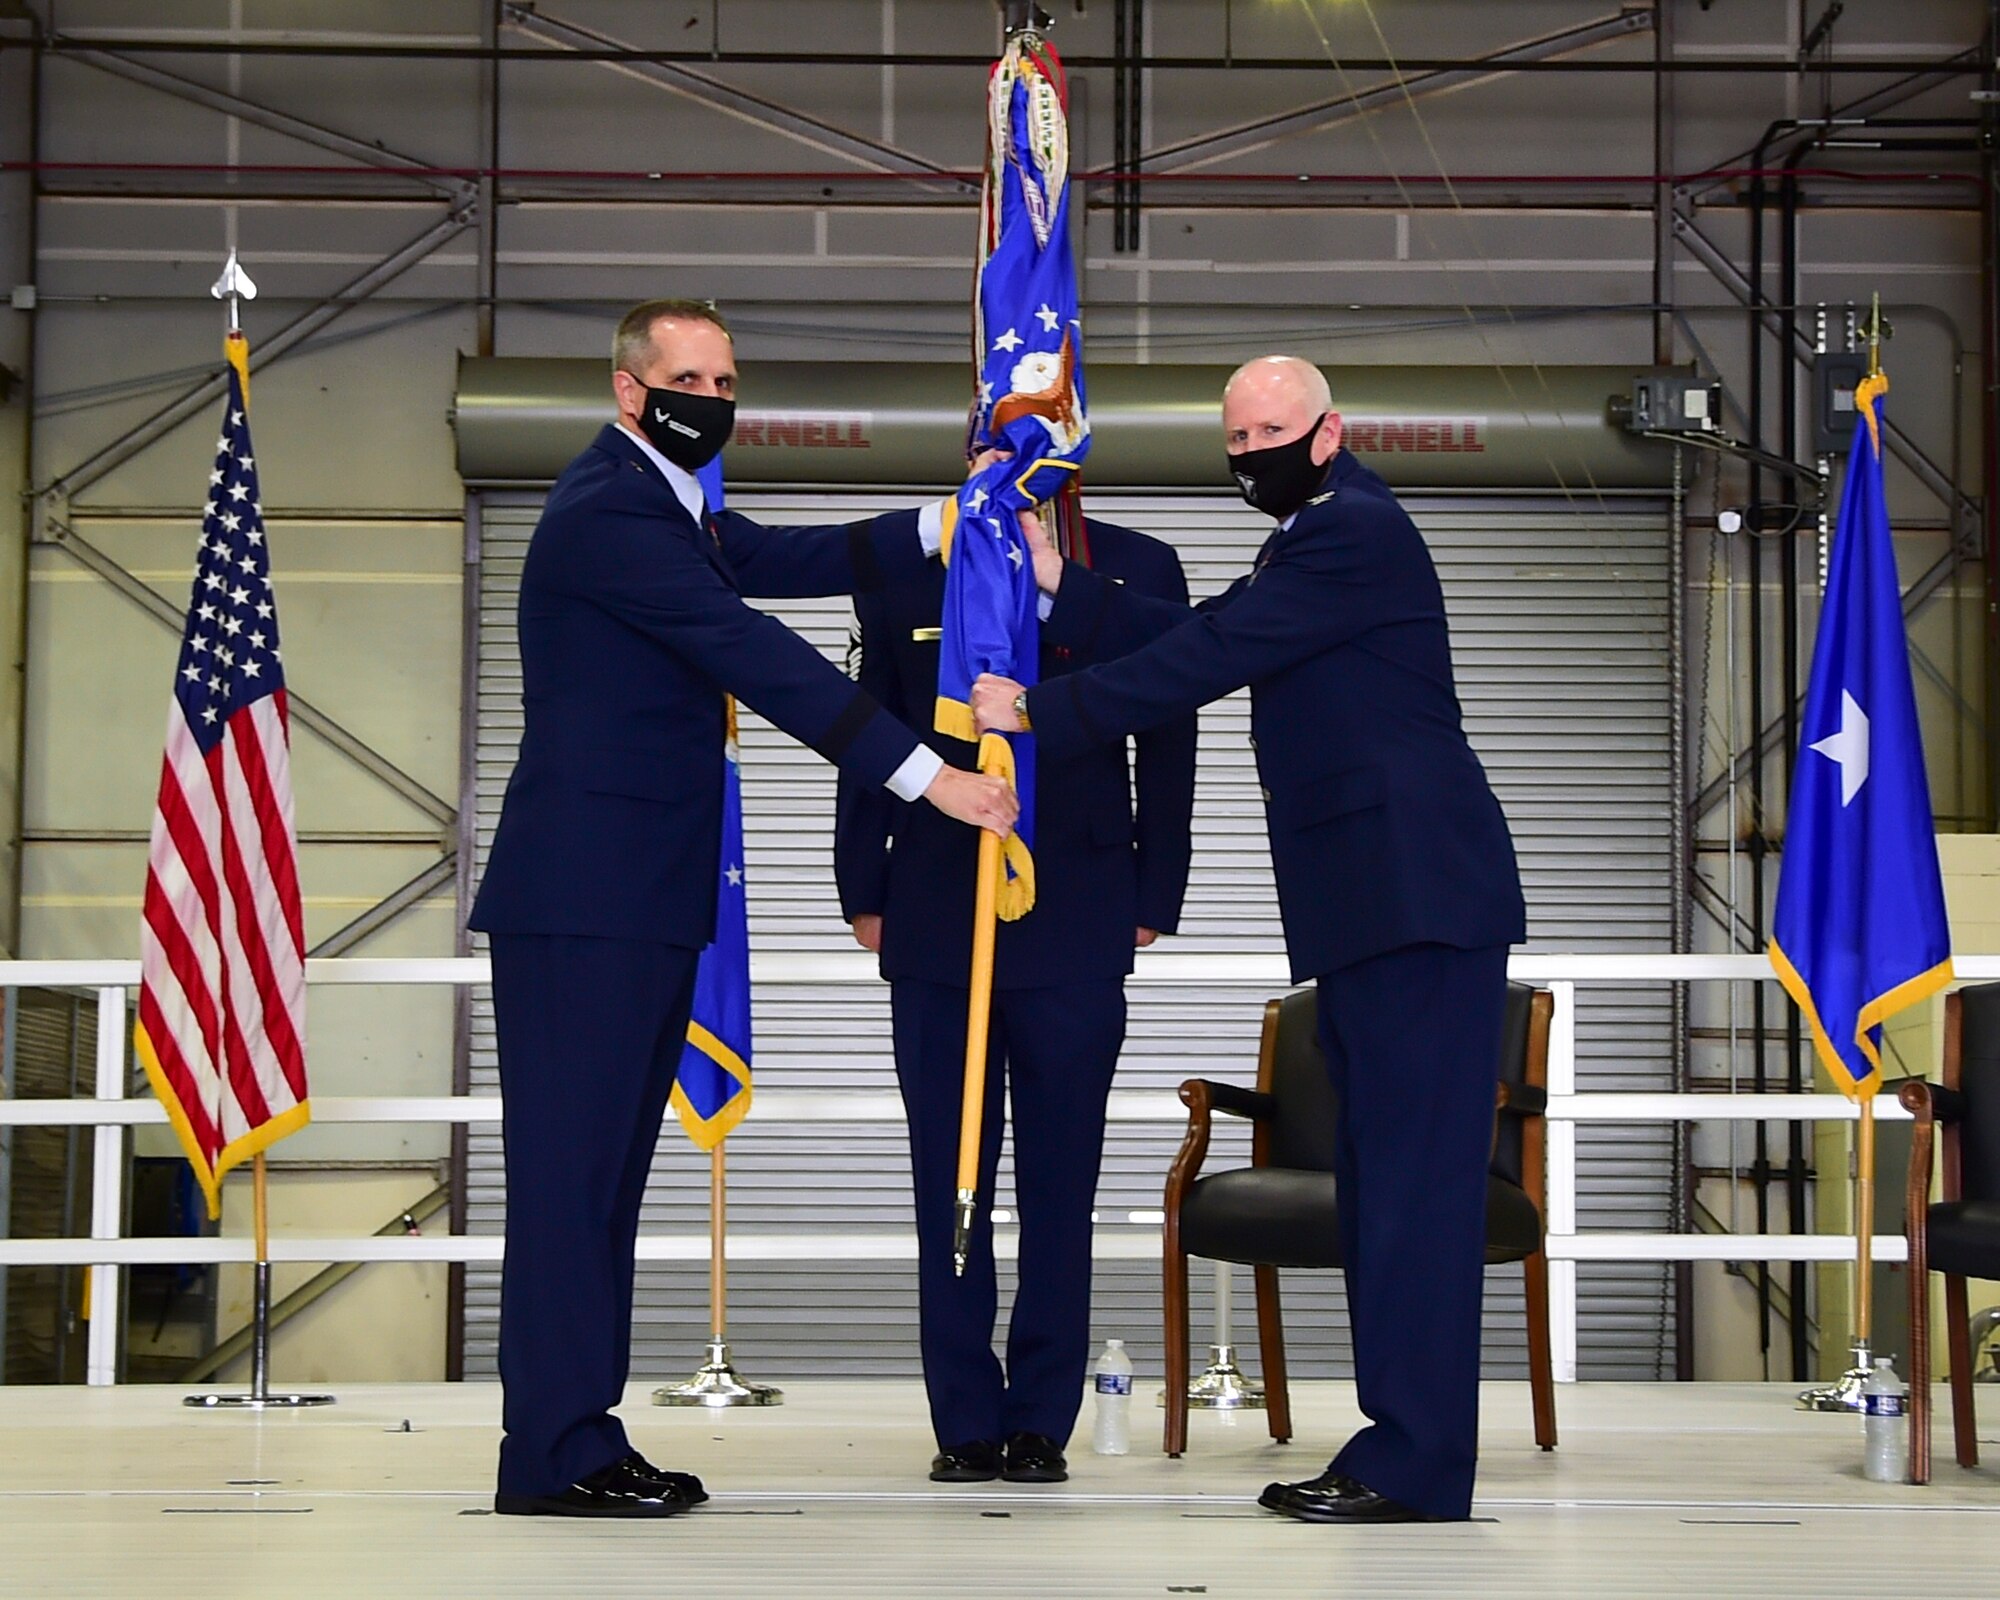 Brig. Gen. Jeffrey T. Pennington, 4th Air Force commander at March Air Reserve Base, California, passes the guidon to Col. Thomas O. Pemberton, 434th Air Refueling Wing commander, during an assumption of command ceremony at Grissom Air Reserve Base, Ind. April 10, 2021. Pemberton was previously the 514th Air Mobility Wing commander at Joint Base McGuire-Dix-Lakehurst, New Jersey. (U.S. Air Force photo by Staff Sgt. Chris Massey)